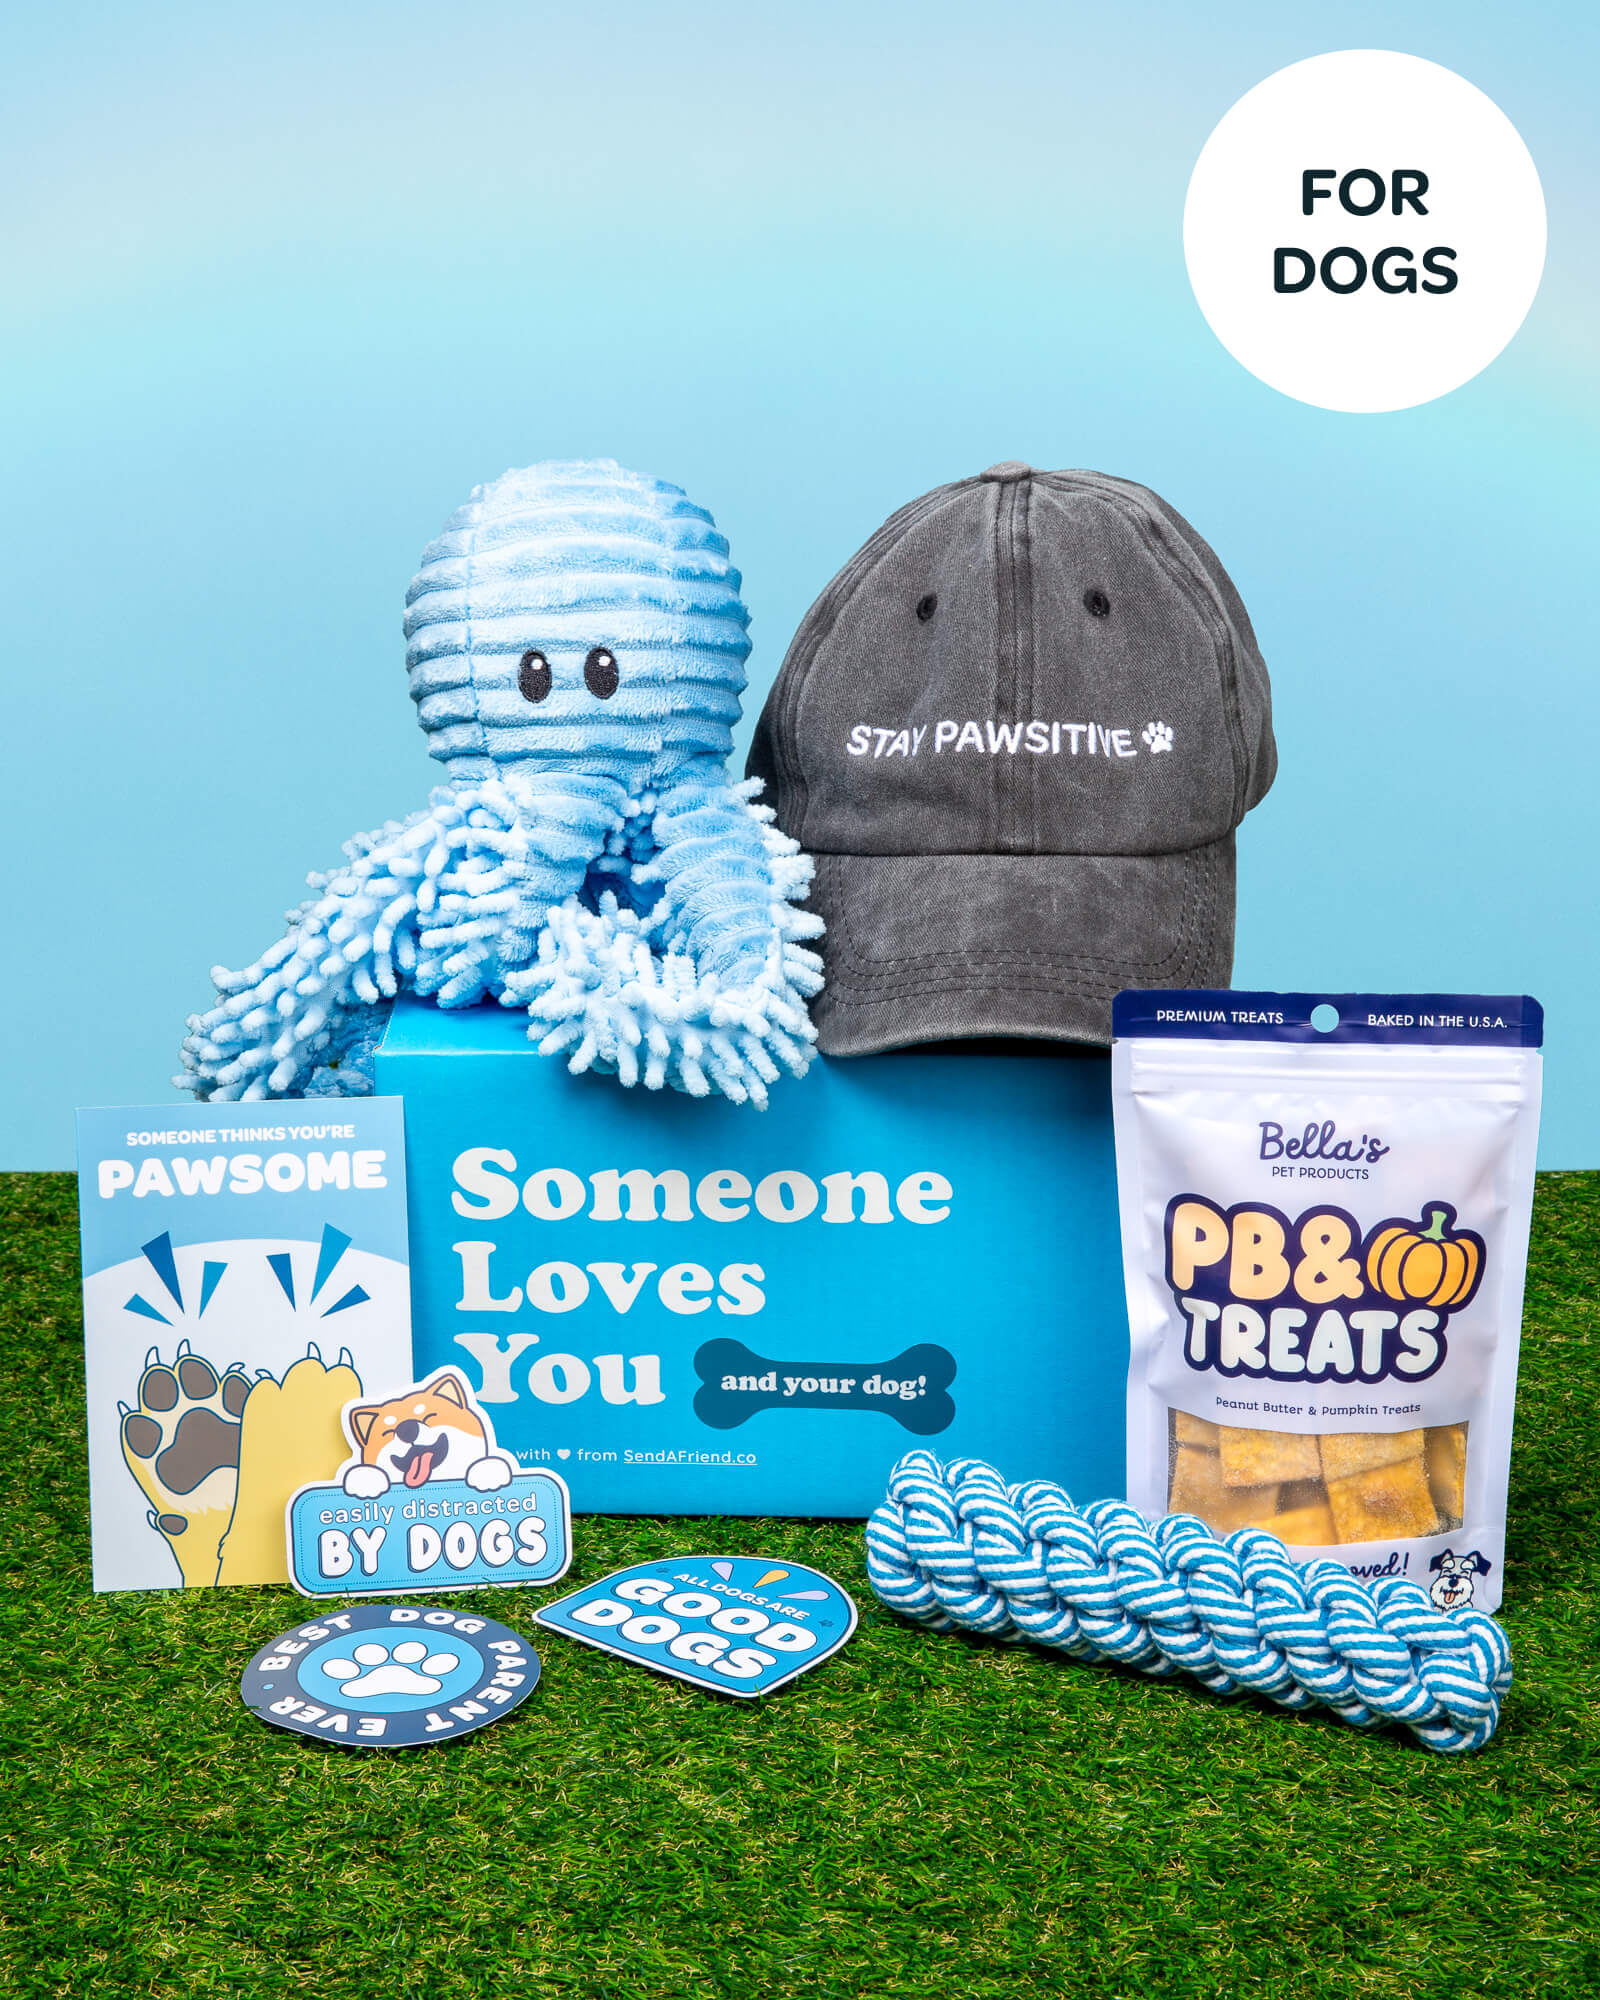 Photo of Someone Loves Your Dog Bundle: octopus plush dog toy, human hat, promo card, 3 stickers, rope toy for dog, dog treats